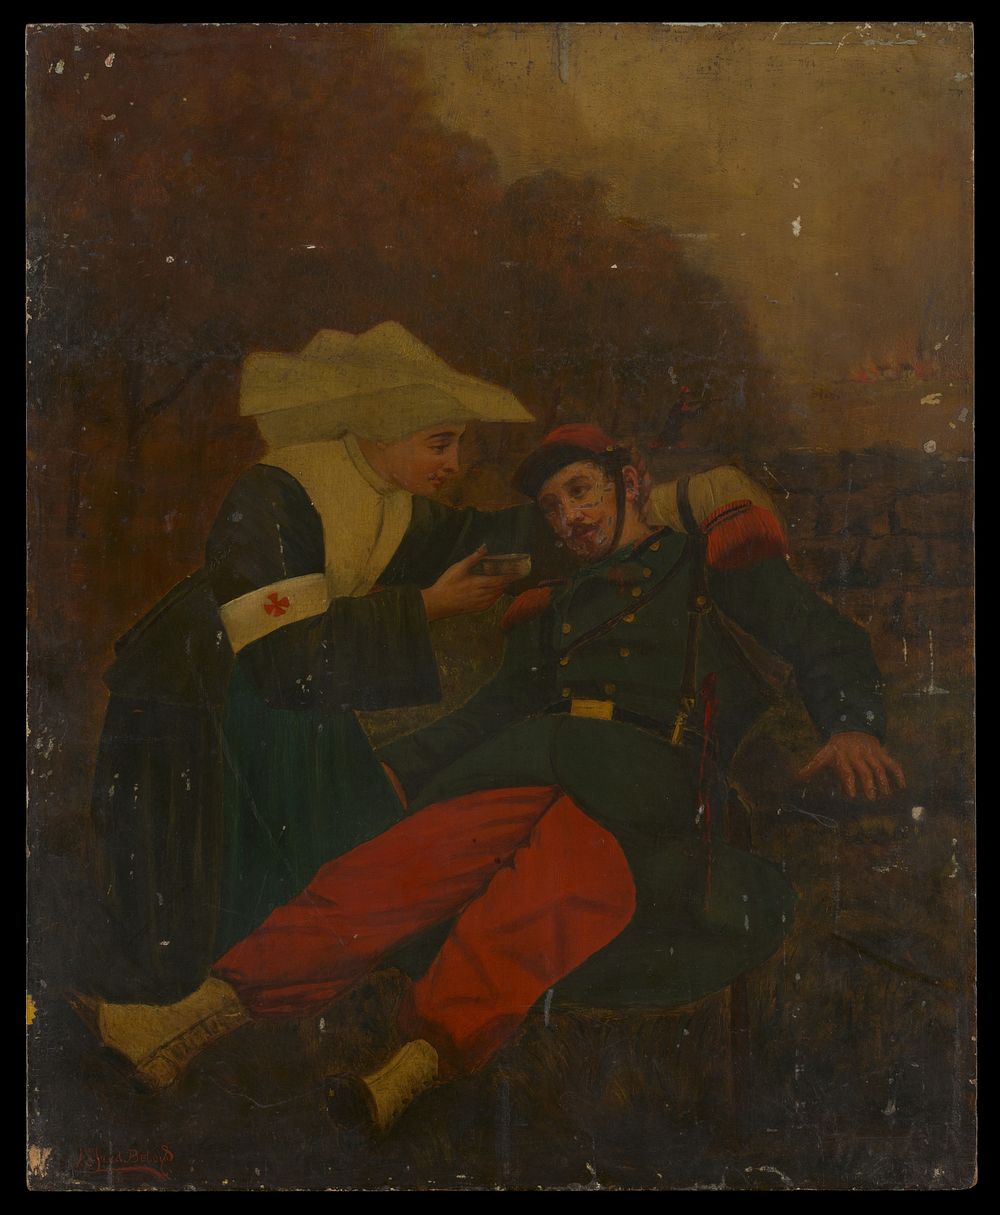 A Sister of Charity caring for a wounded soldier. Oil painting by A. Beloys, 187-.